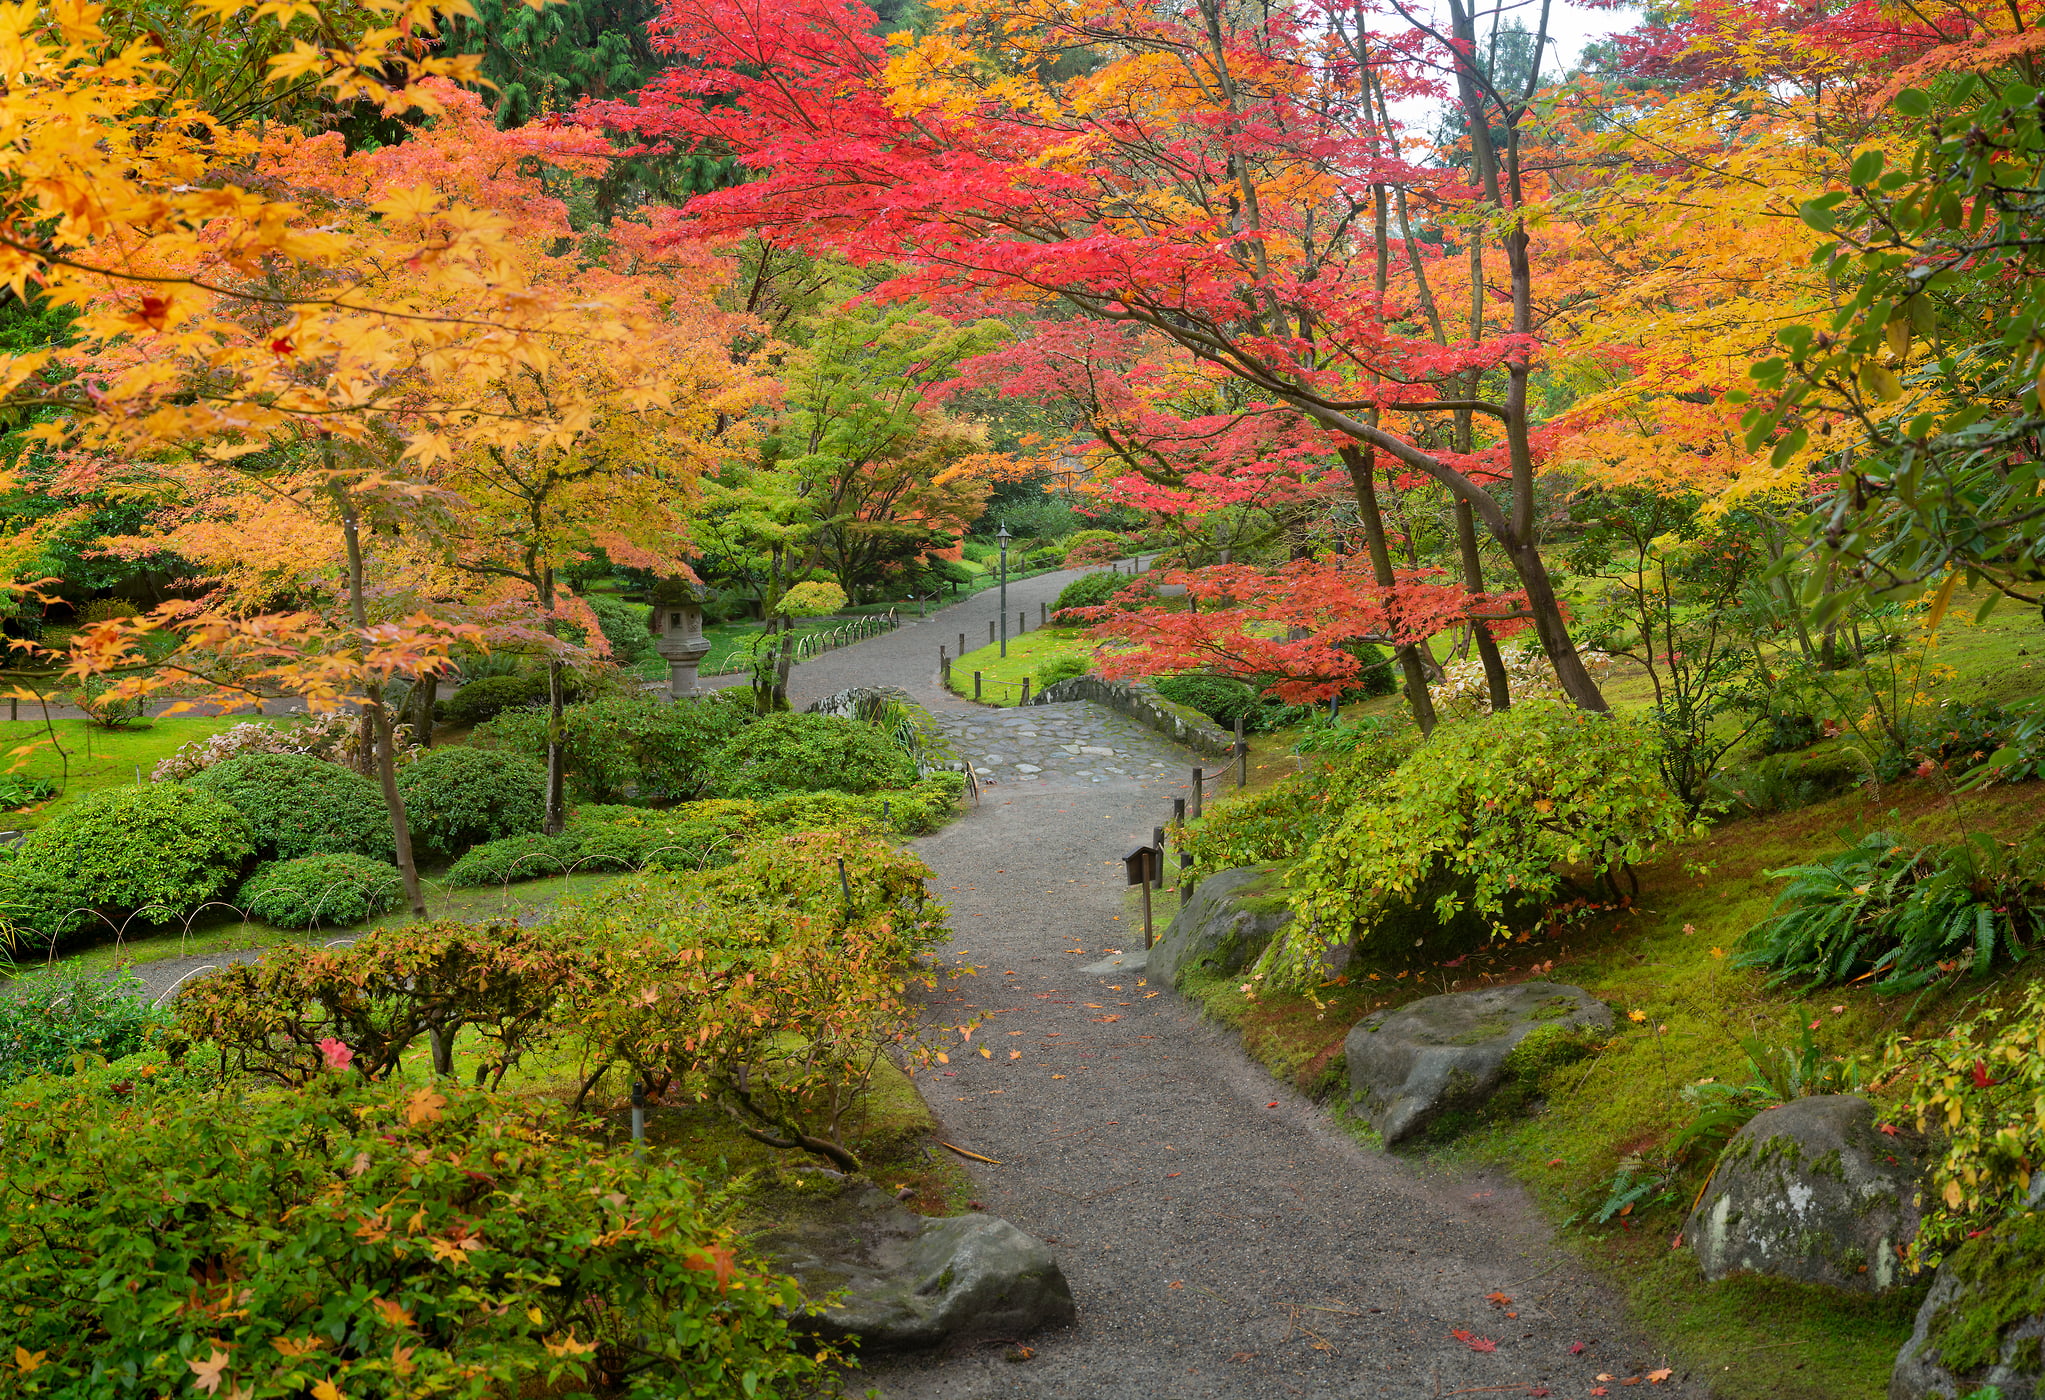 319 megapixels! A very high resolution, large-format VAST photo print of a garden in the fall with colorful fall foliage; nature photograph created by Greg Probst in Japanese Garden, Seattle, WA